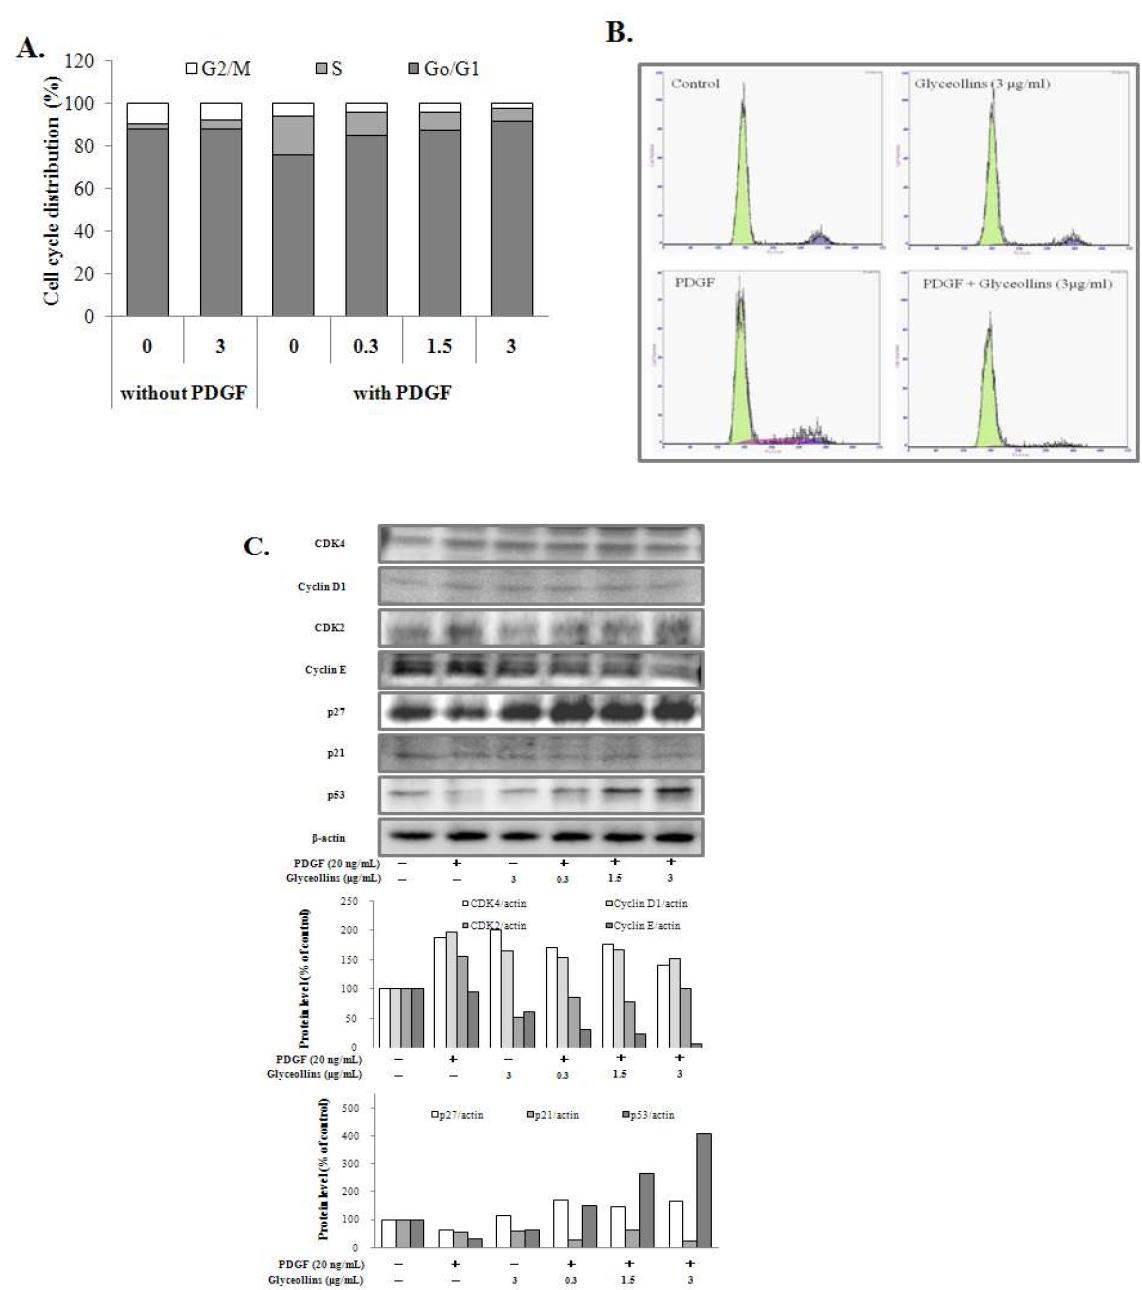 Effect of glyceollins on cell cycle progression in HASMC stimulated by PDGF.